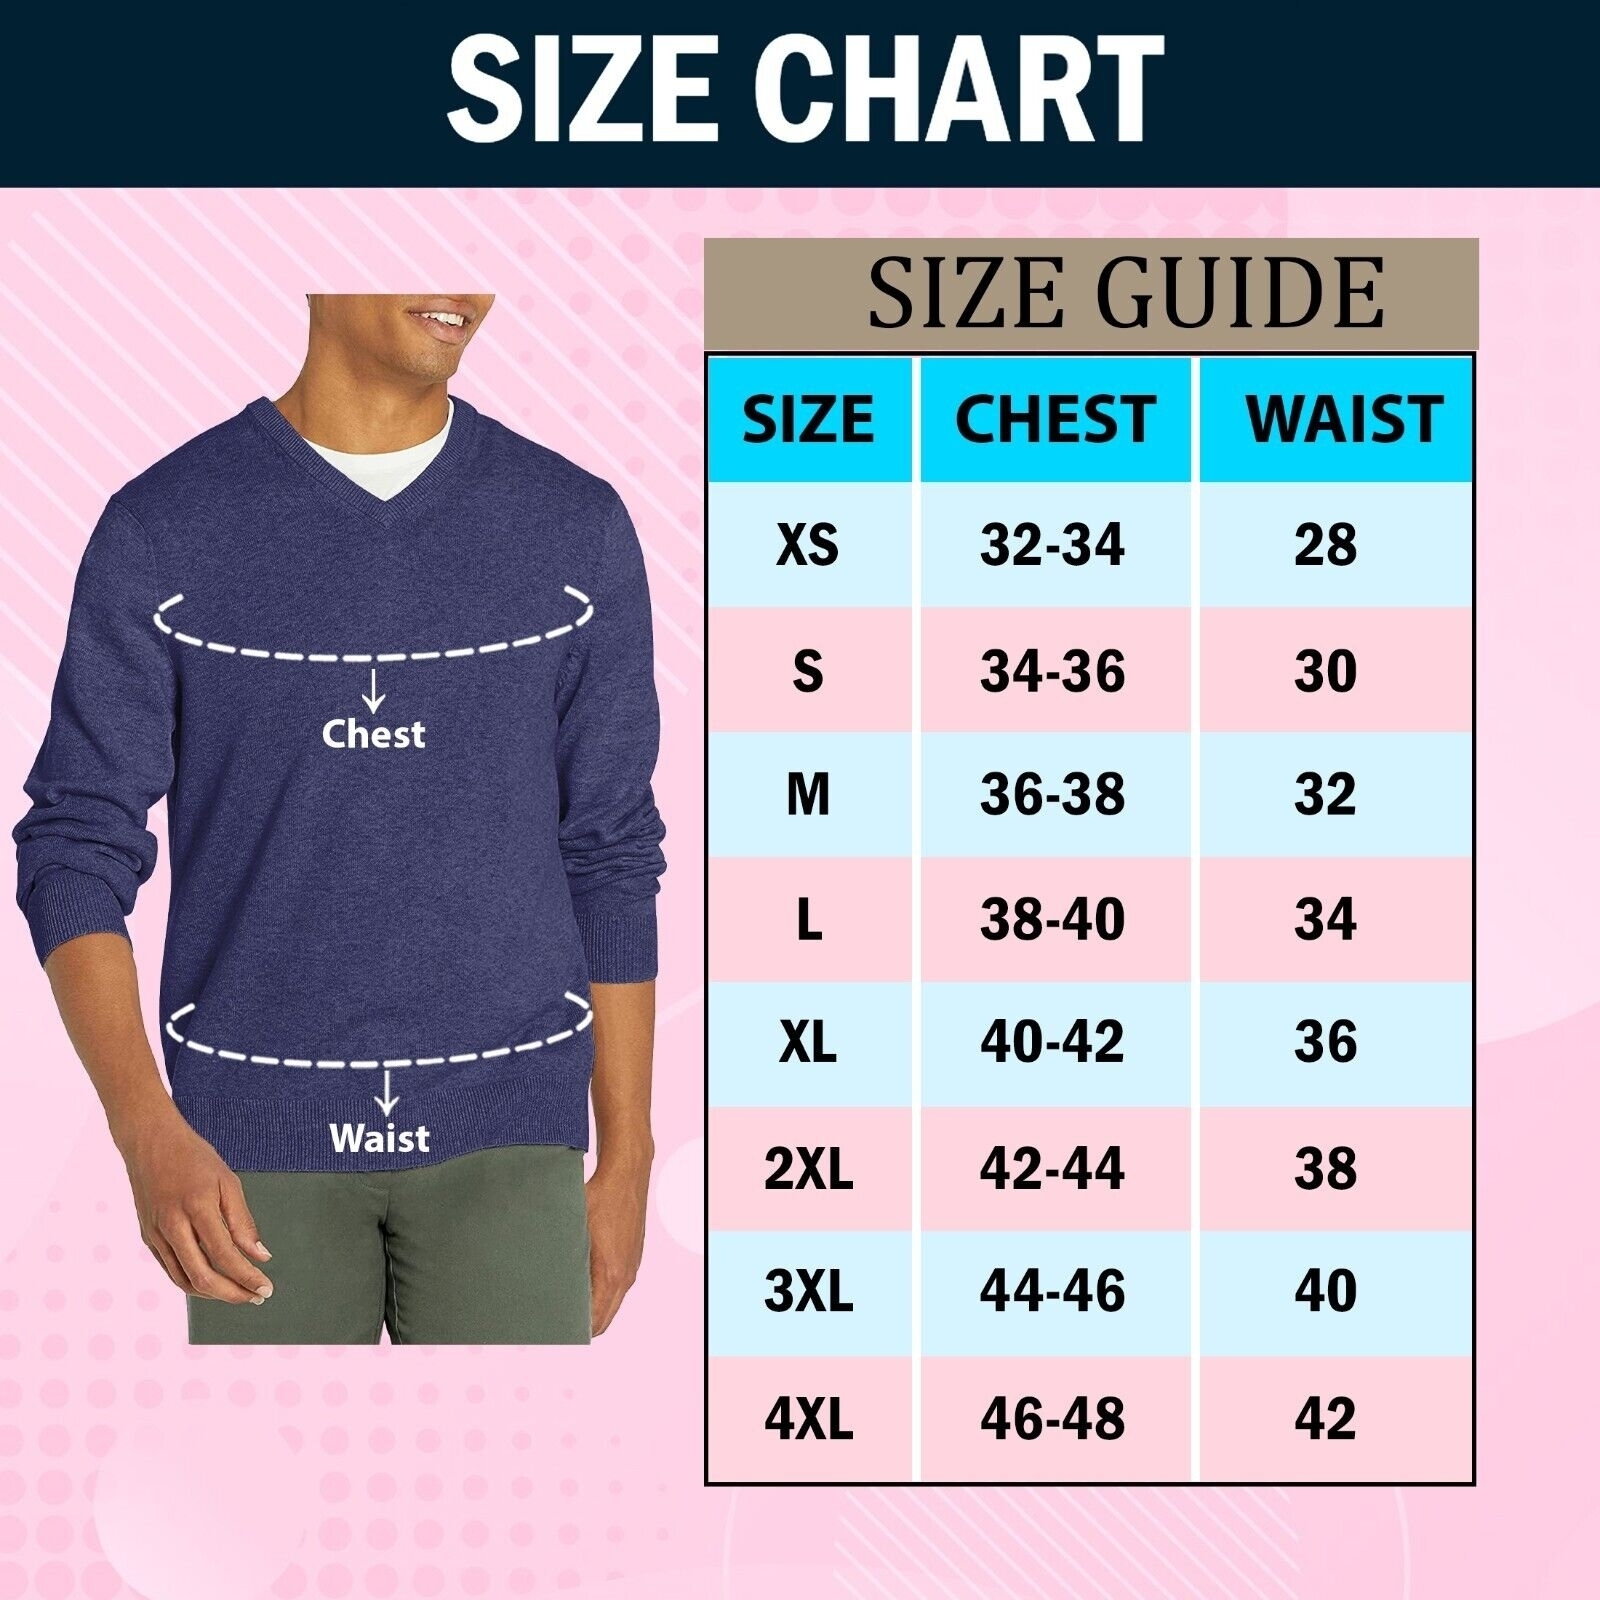 Multi-Pack Mens Cozy Comfy Ultra Soft Slim Fit Warm Knit Pullover V-Neck Sweater - 1, XX-Large